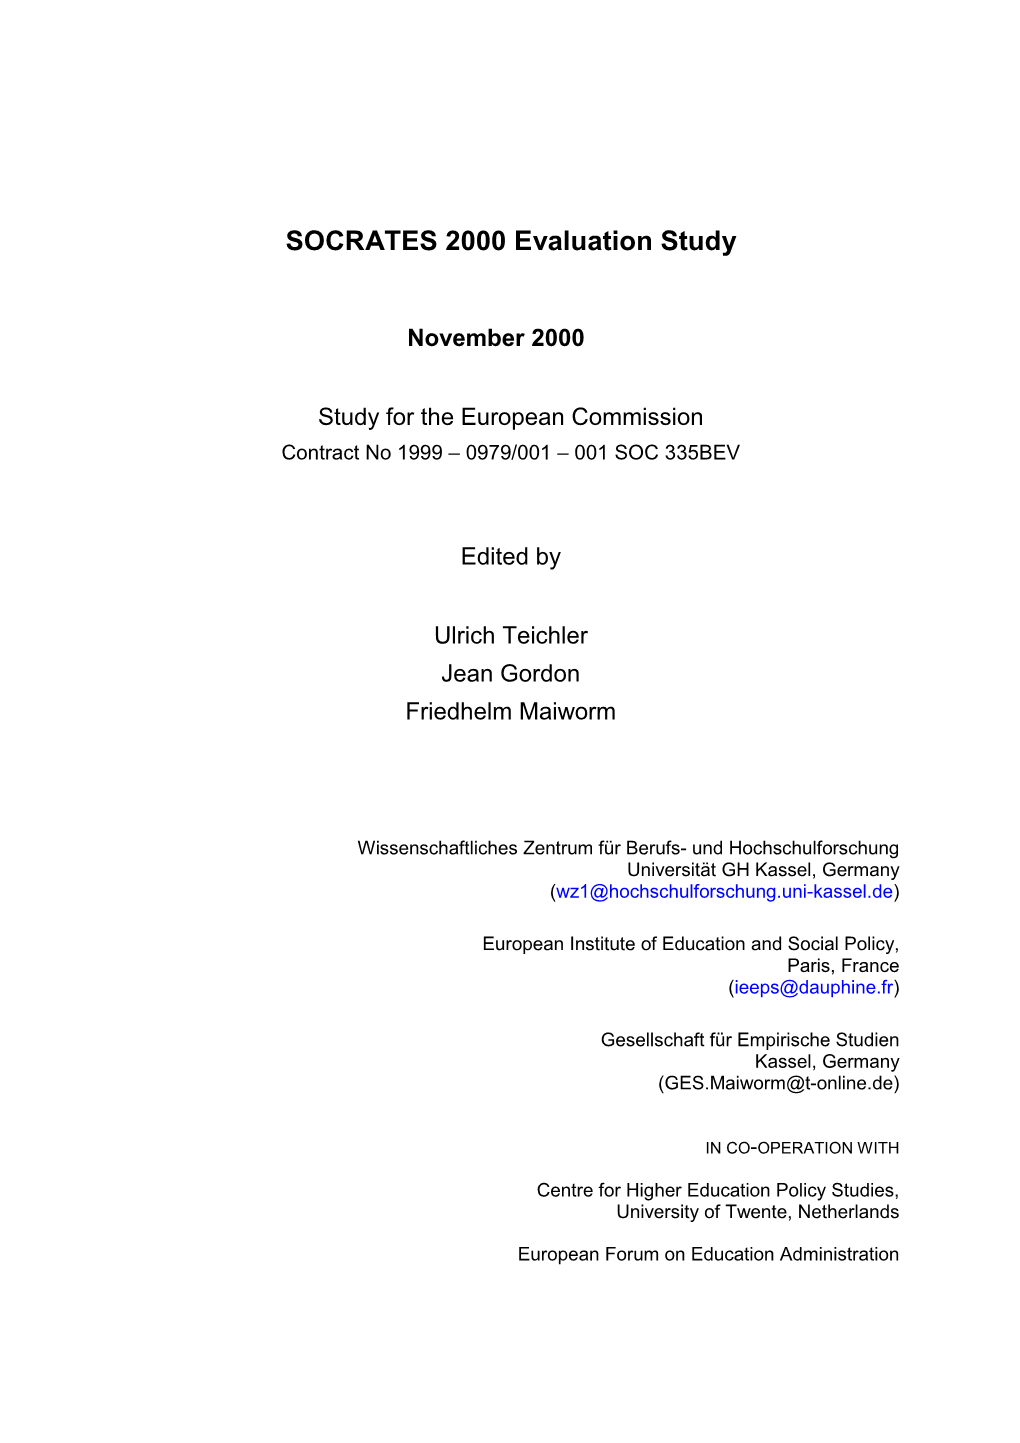 Socrates 2000 Evaluation Study: Overall Report